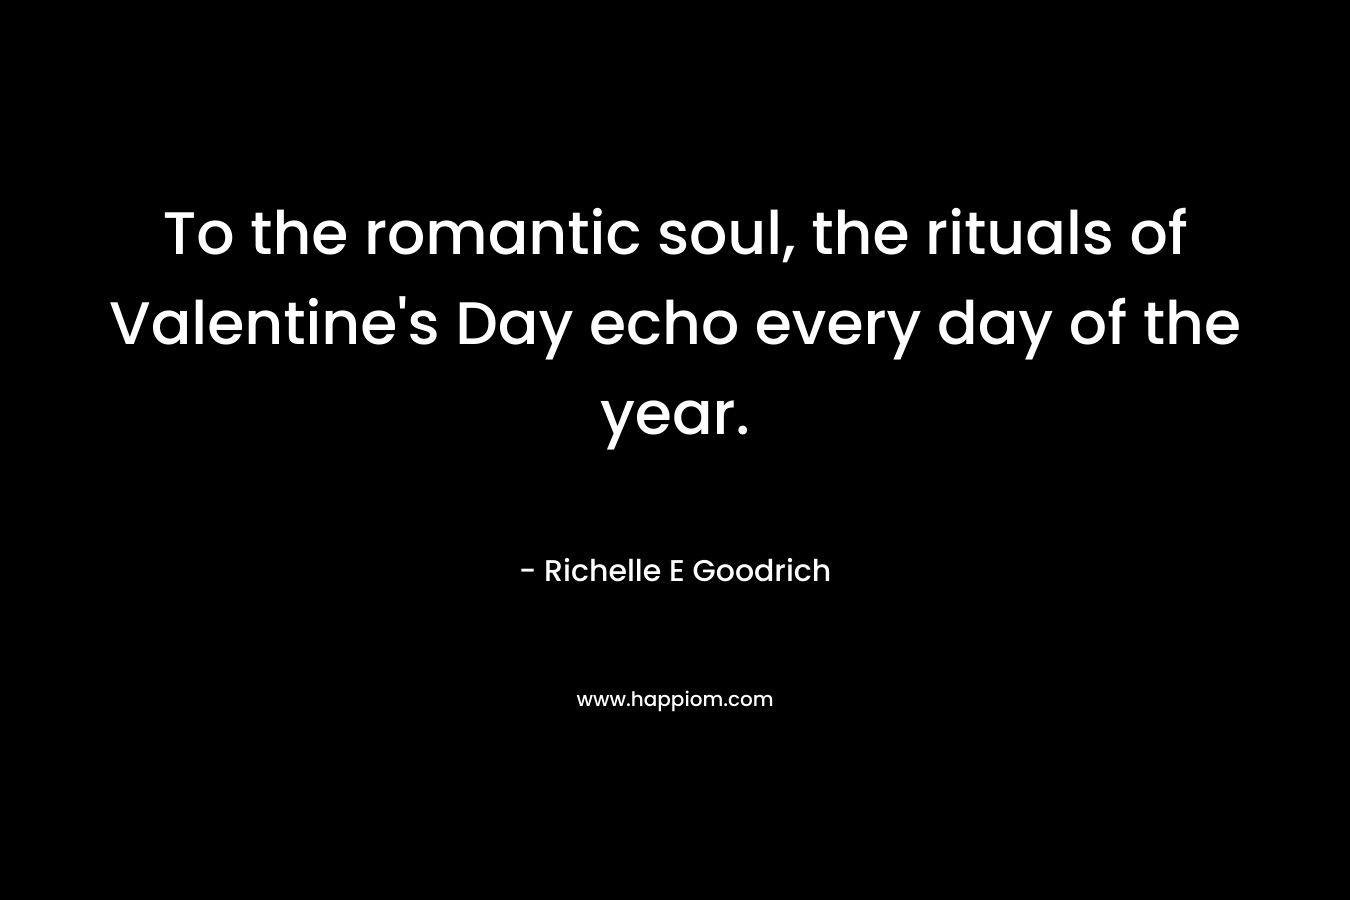 To the romantic soul, the rituals of Valentine's Day echo every day of the year.